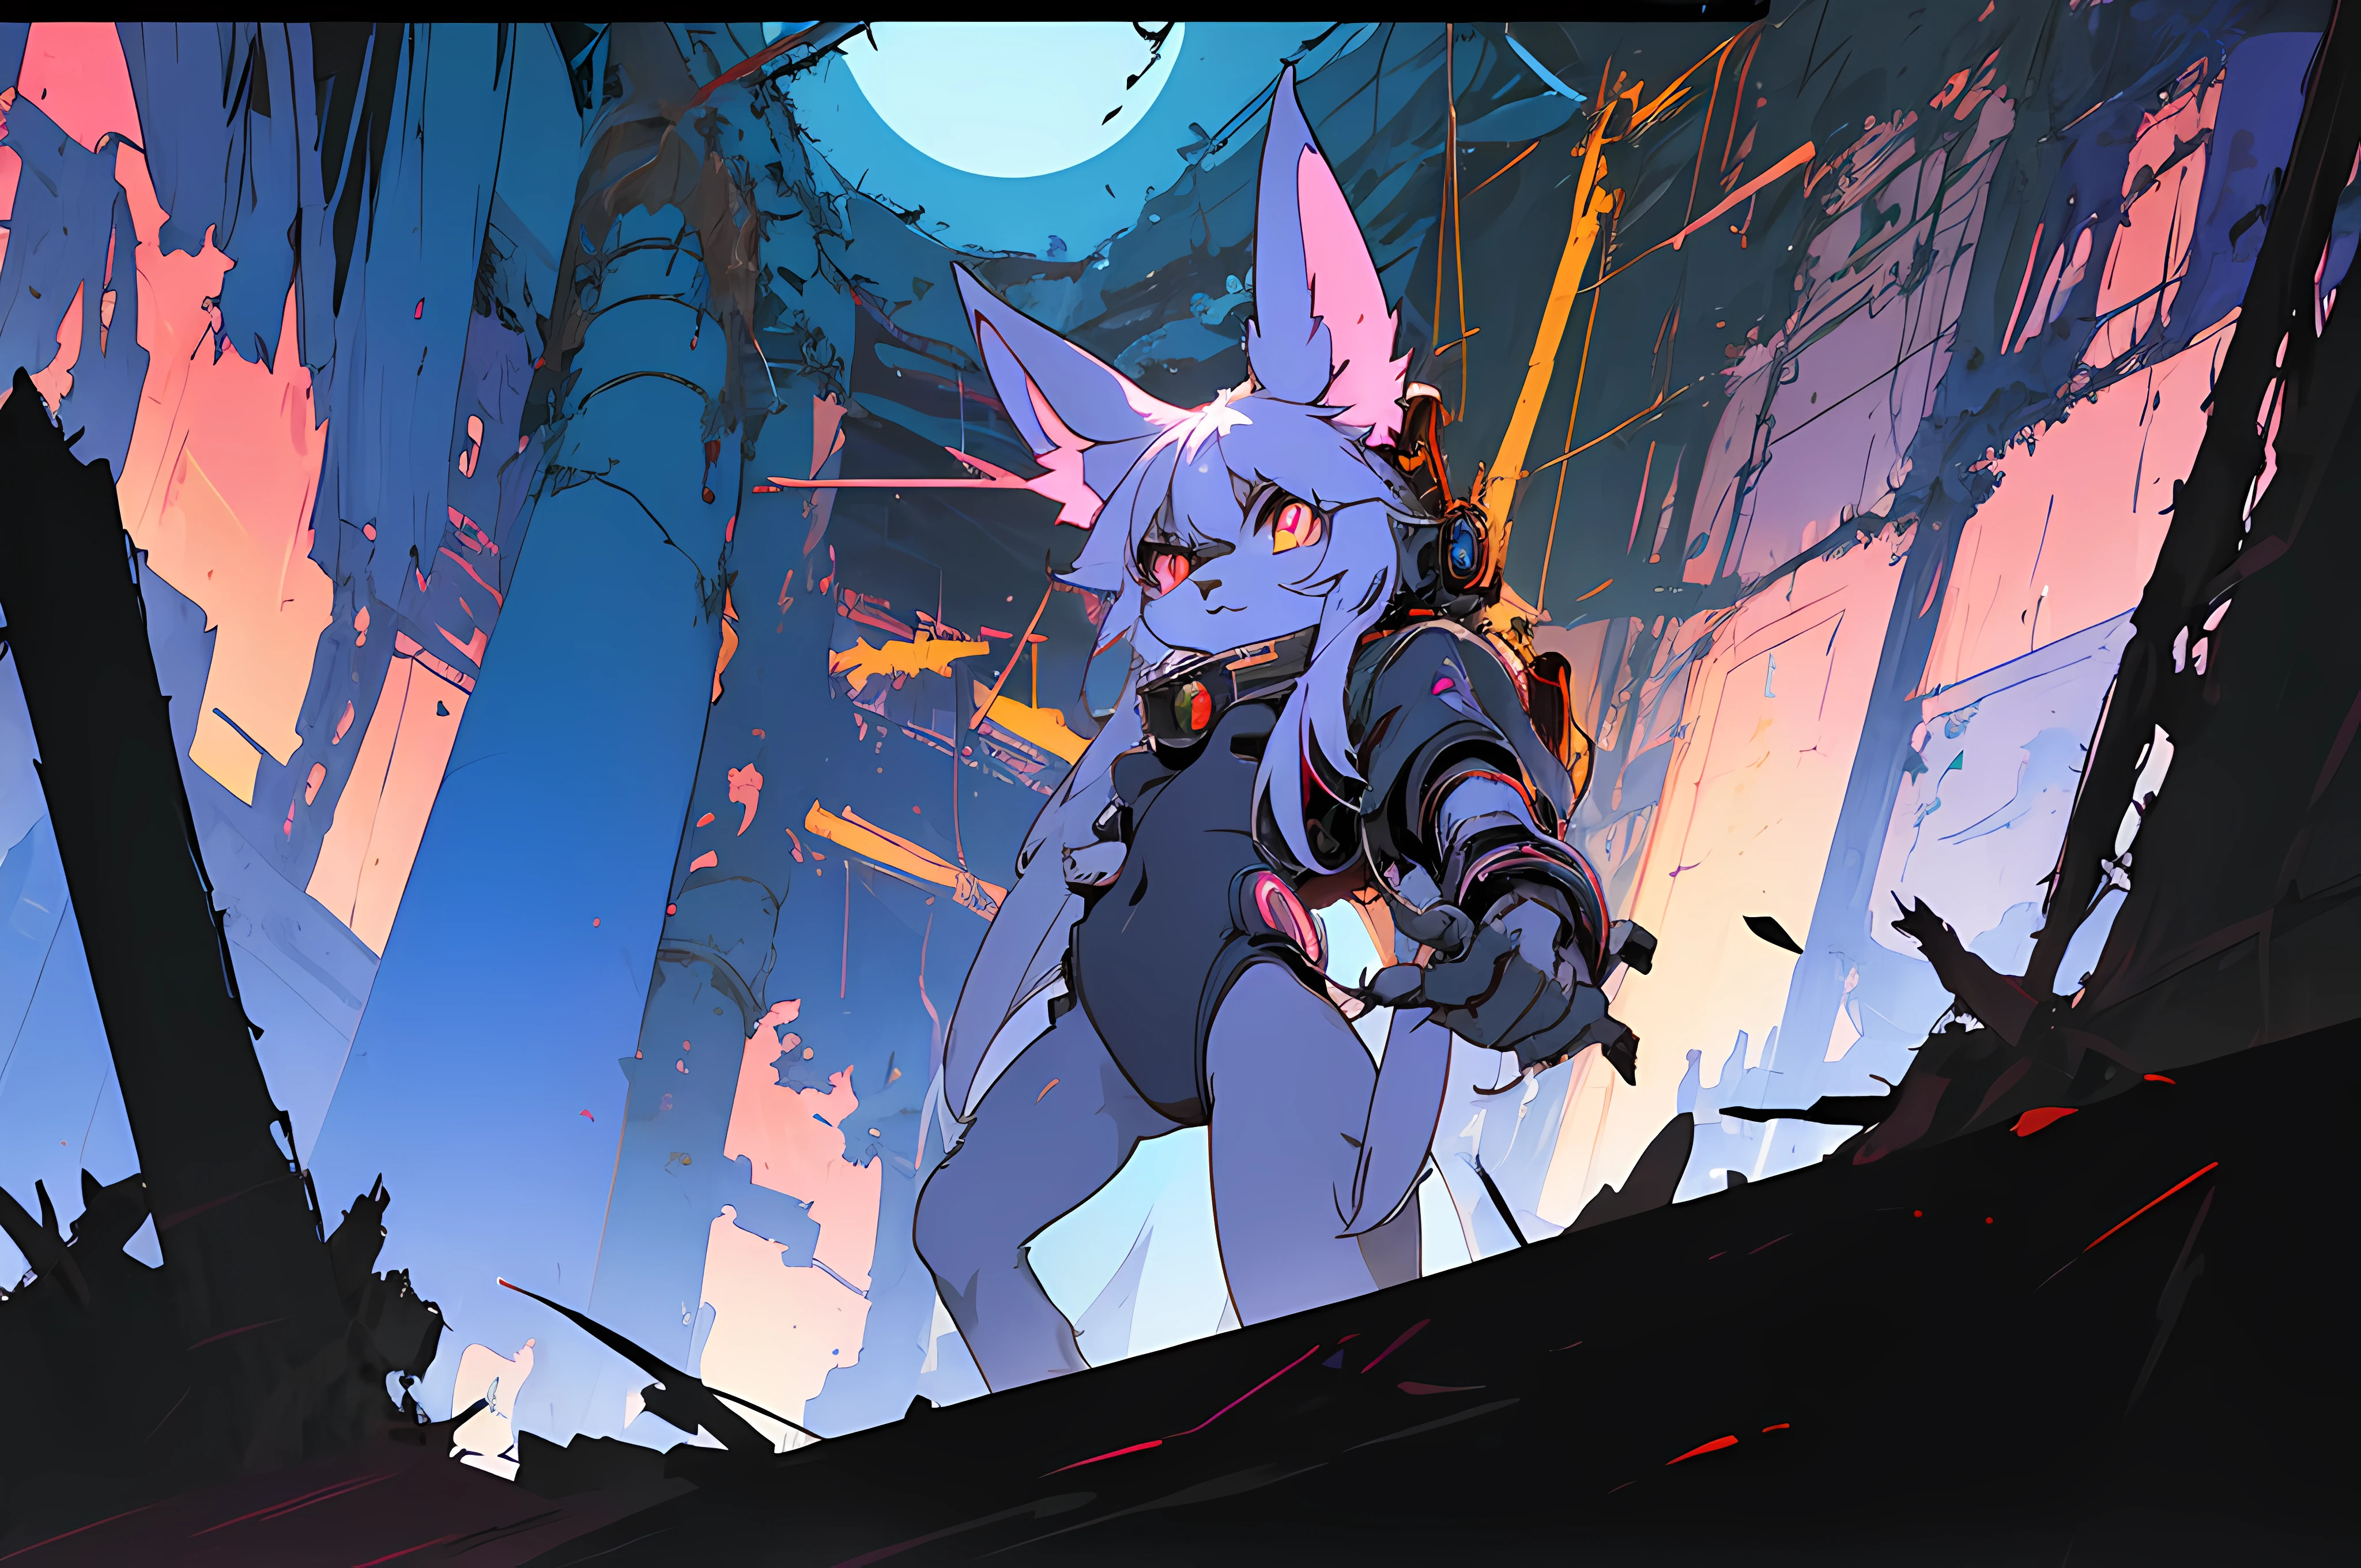 (vintage vhs), (crt screenshot), (((dark scene))), (((dark cloudy scene))), (((underground basement scene))), (((unlit nighttime scene))), (((dark abandoned cathedral house))), (((solemn blue anthro kemono furry rabbit exploring old ruins))), (((underground cavern exploring in old ruins))), anime rabbit character with futuristic hair and glowing eyes exploring old ruins, anime art, anime aesthetic, (((old ruins in background cel art))), kemono anime rabbit girl, wearing cybernetic bunny ears, angry female fighter --v6